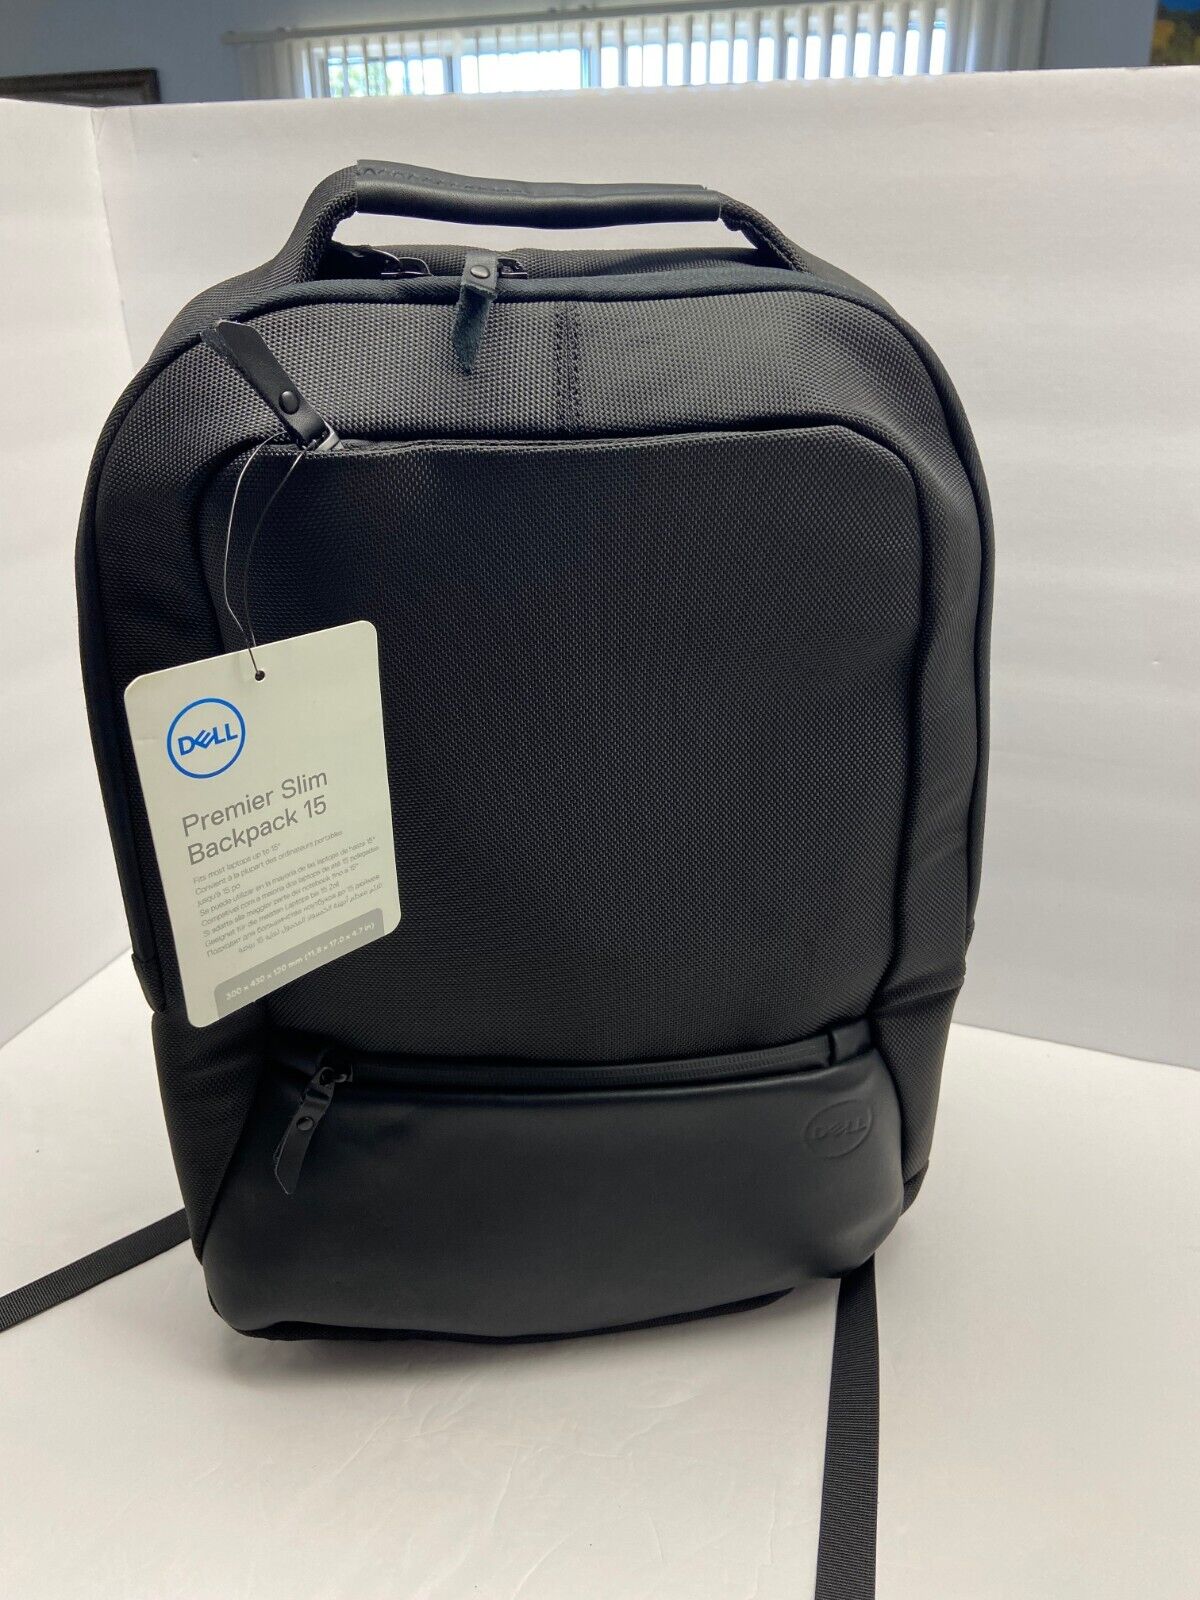 OEM Genuine Dell Premier Slim Black Backpack 15 PE1520PS PNXHY NEW WITH TAGS